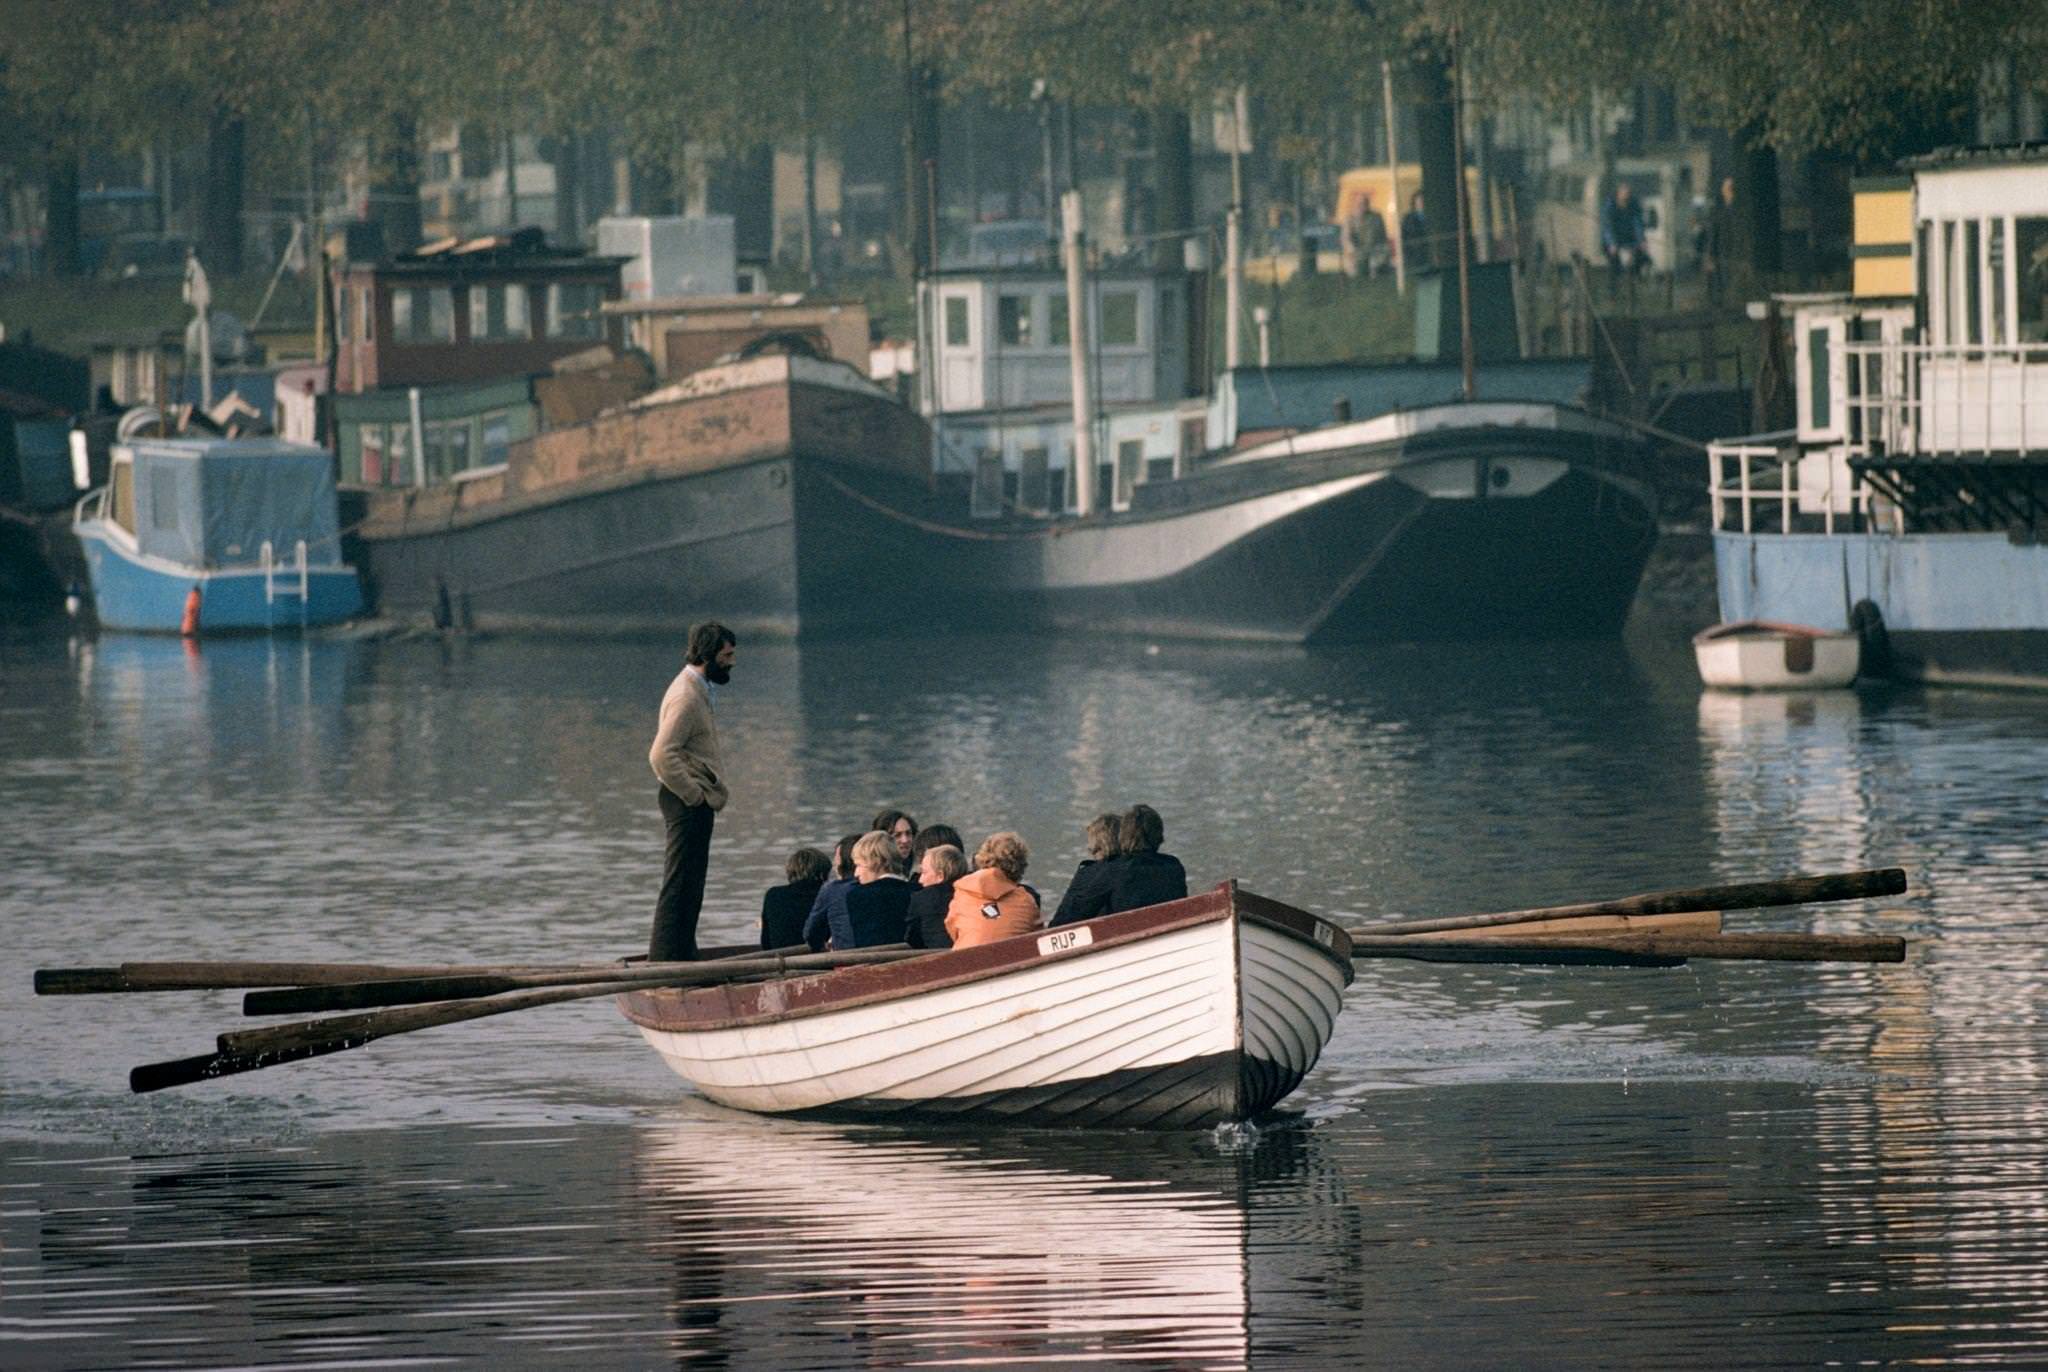 Cadets rowing on a canal with Dutch barges beyond in Amsterdam , May 1976